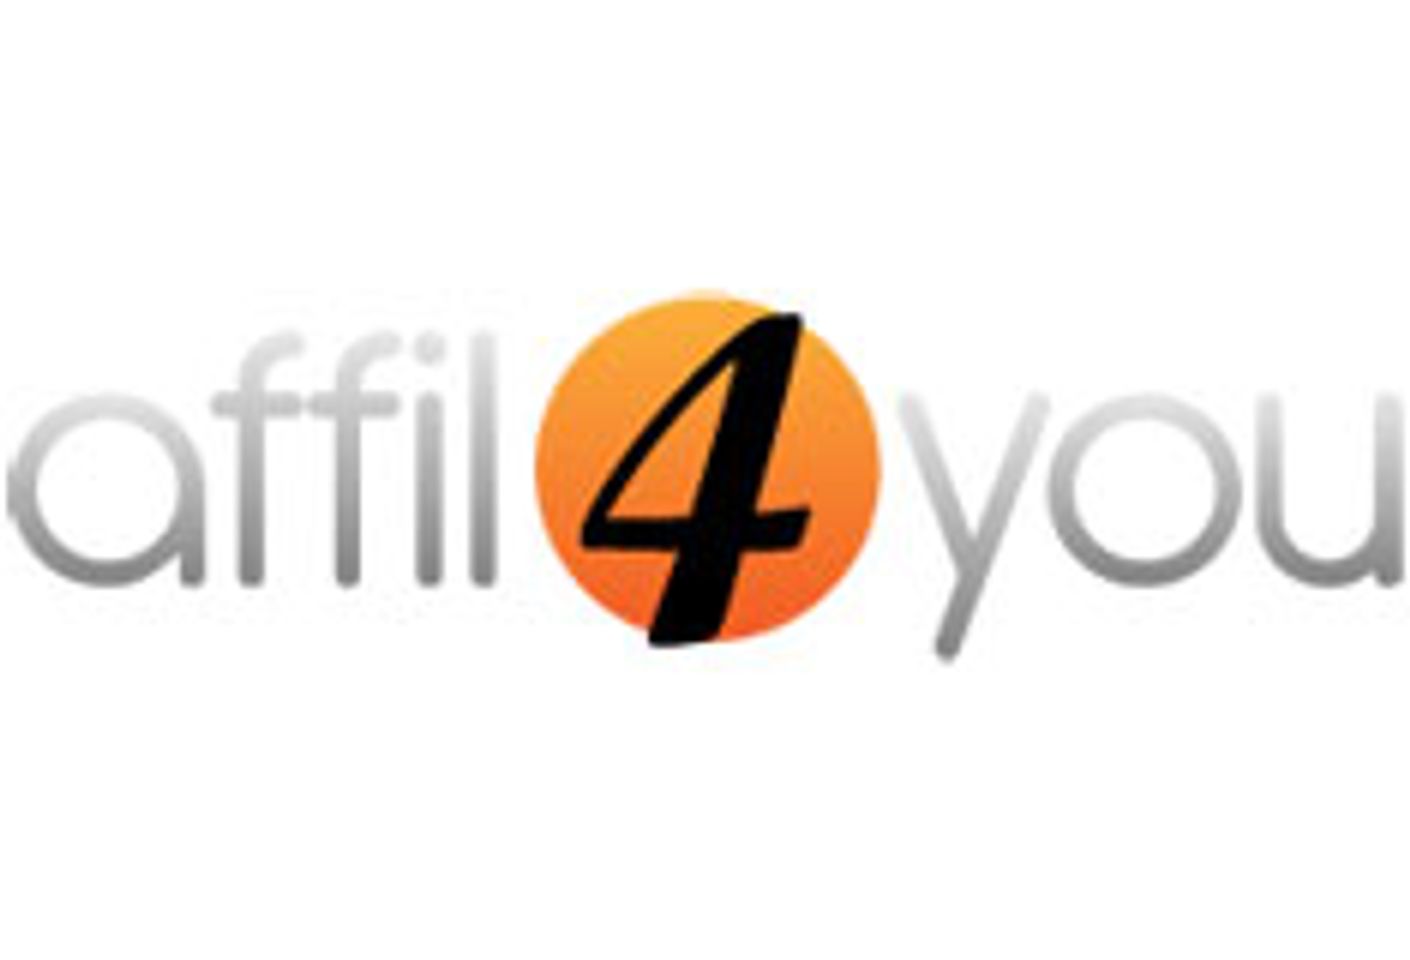 Affil4You Invites You For a Drink at Webmaster Access Amsterdam